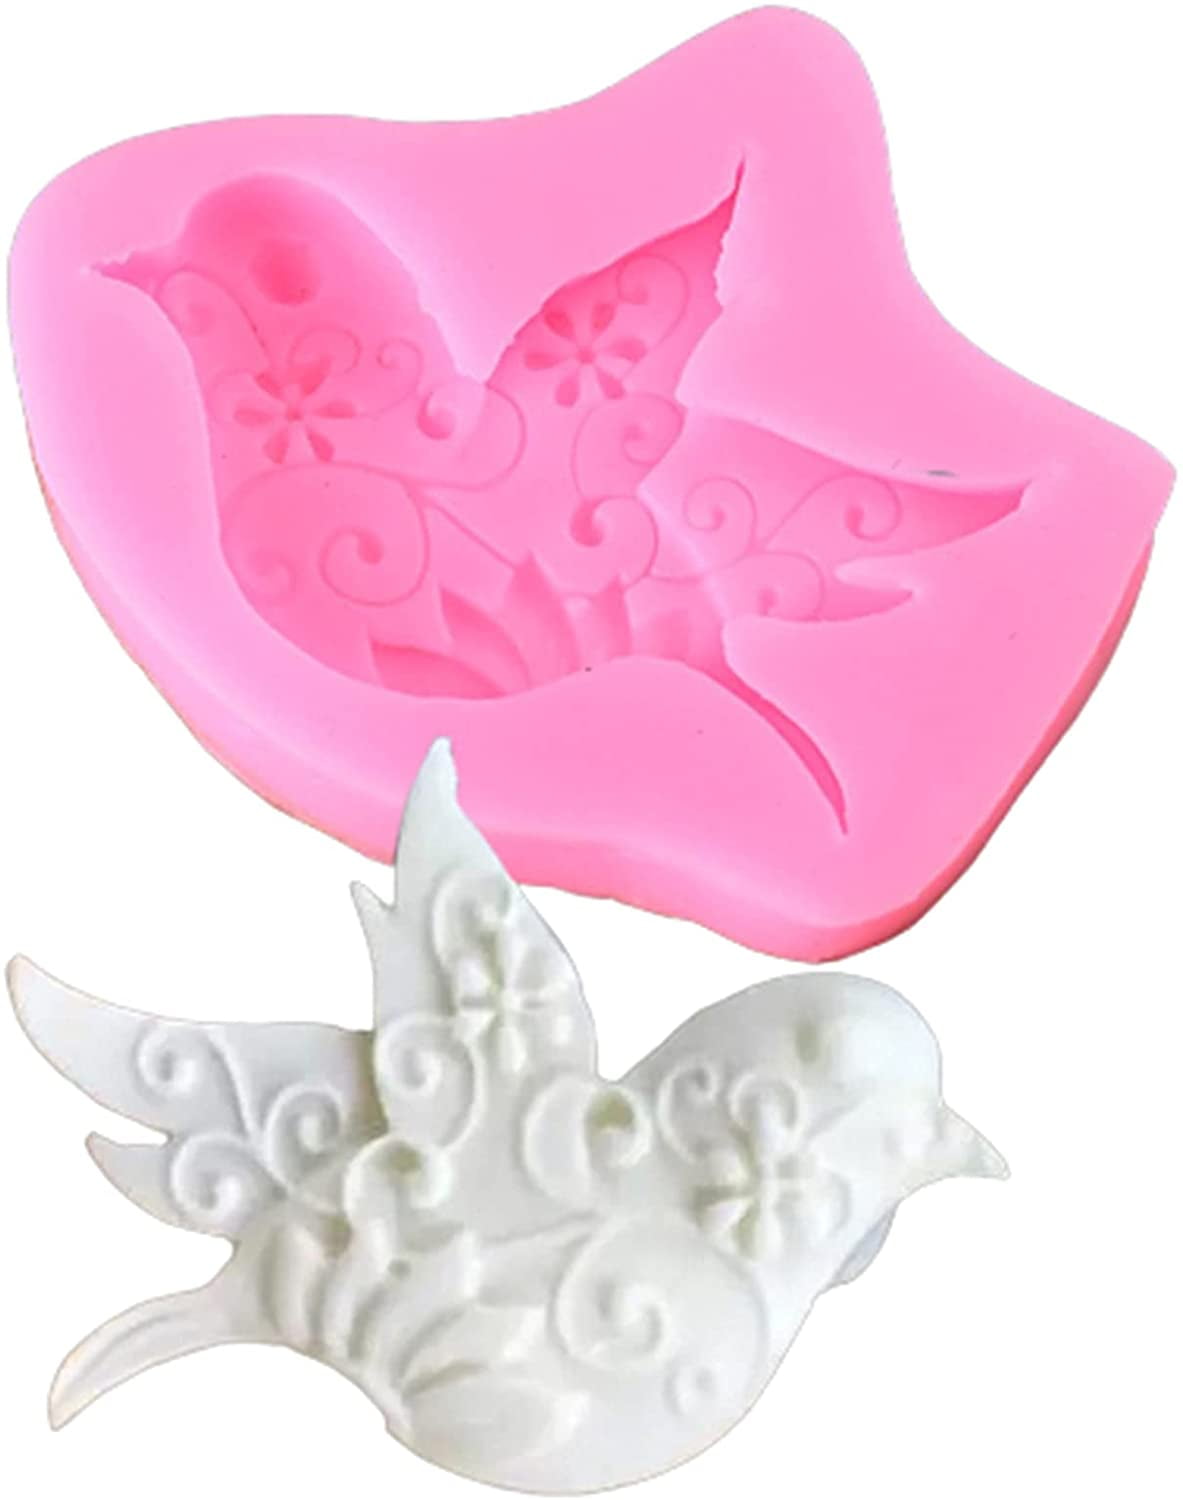 Cute Bird Fondant Silicone Mold Baking Chocolate Pastry Candy Cupcake Decor Tool